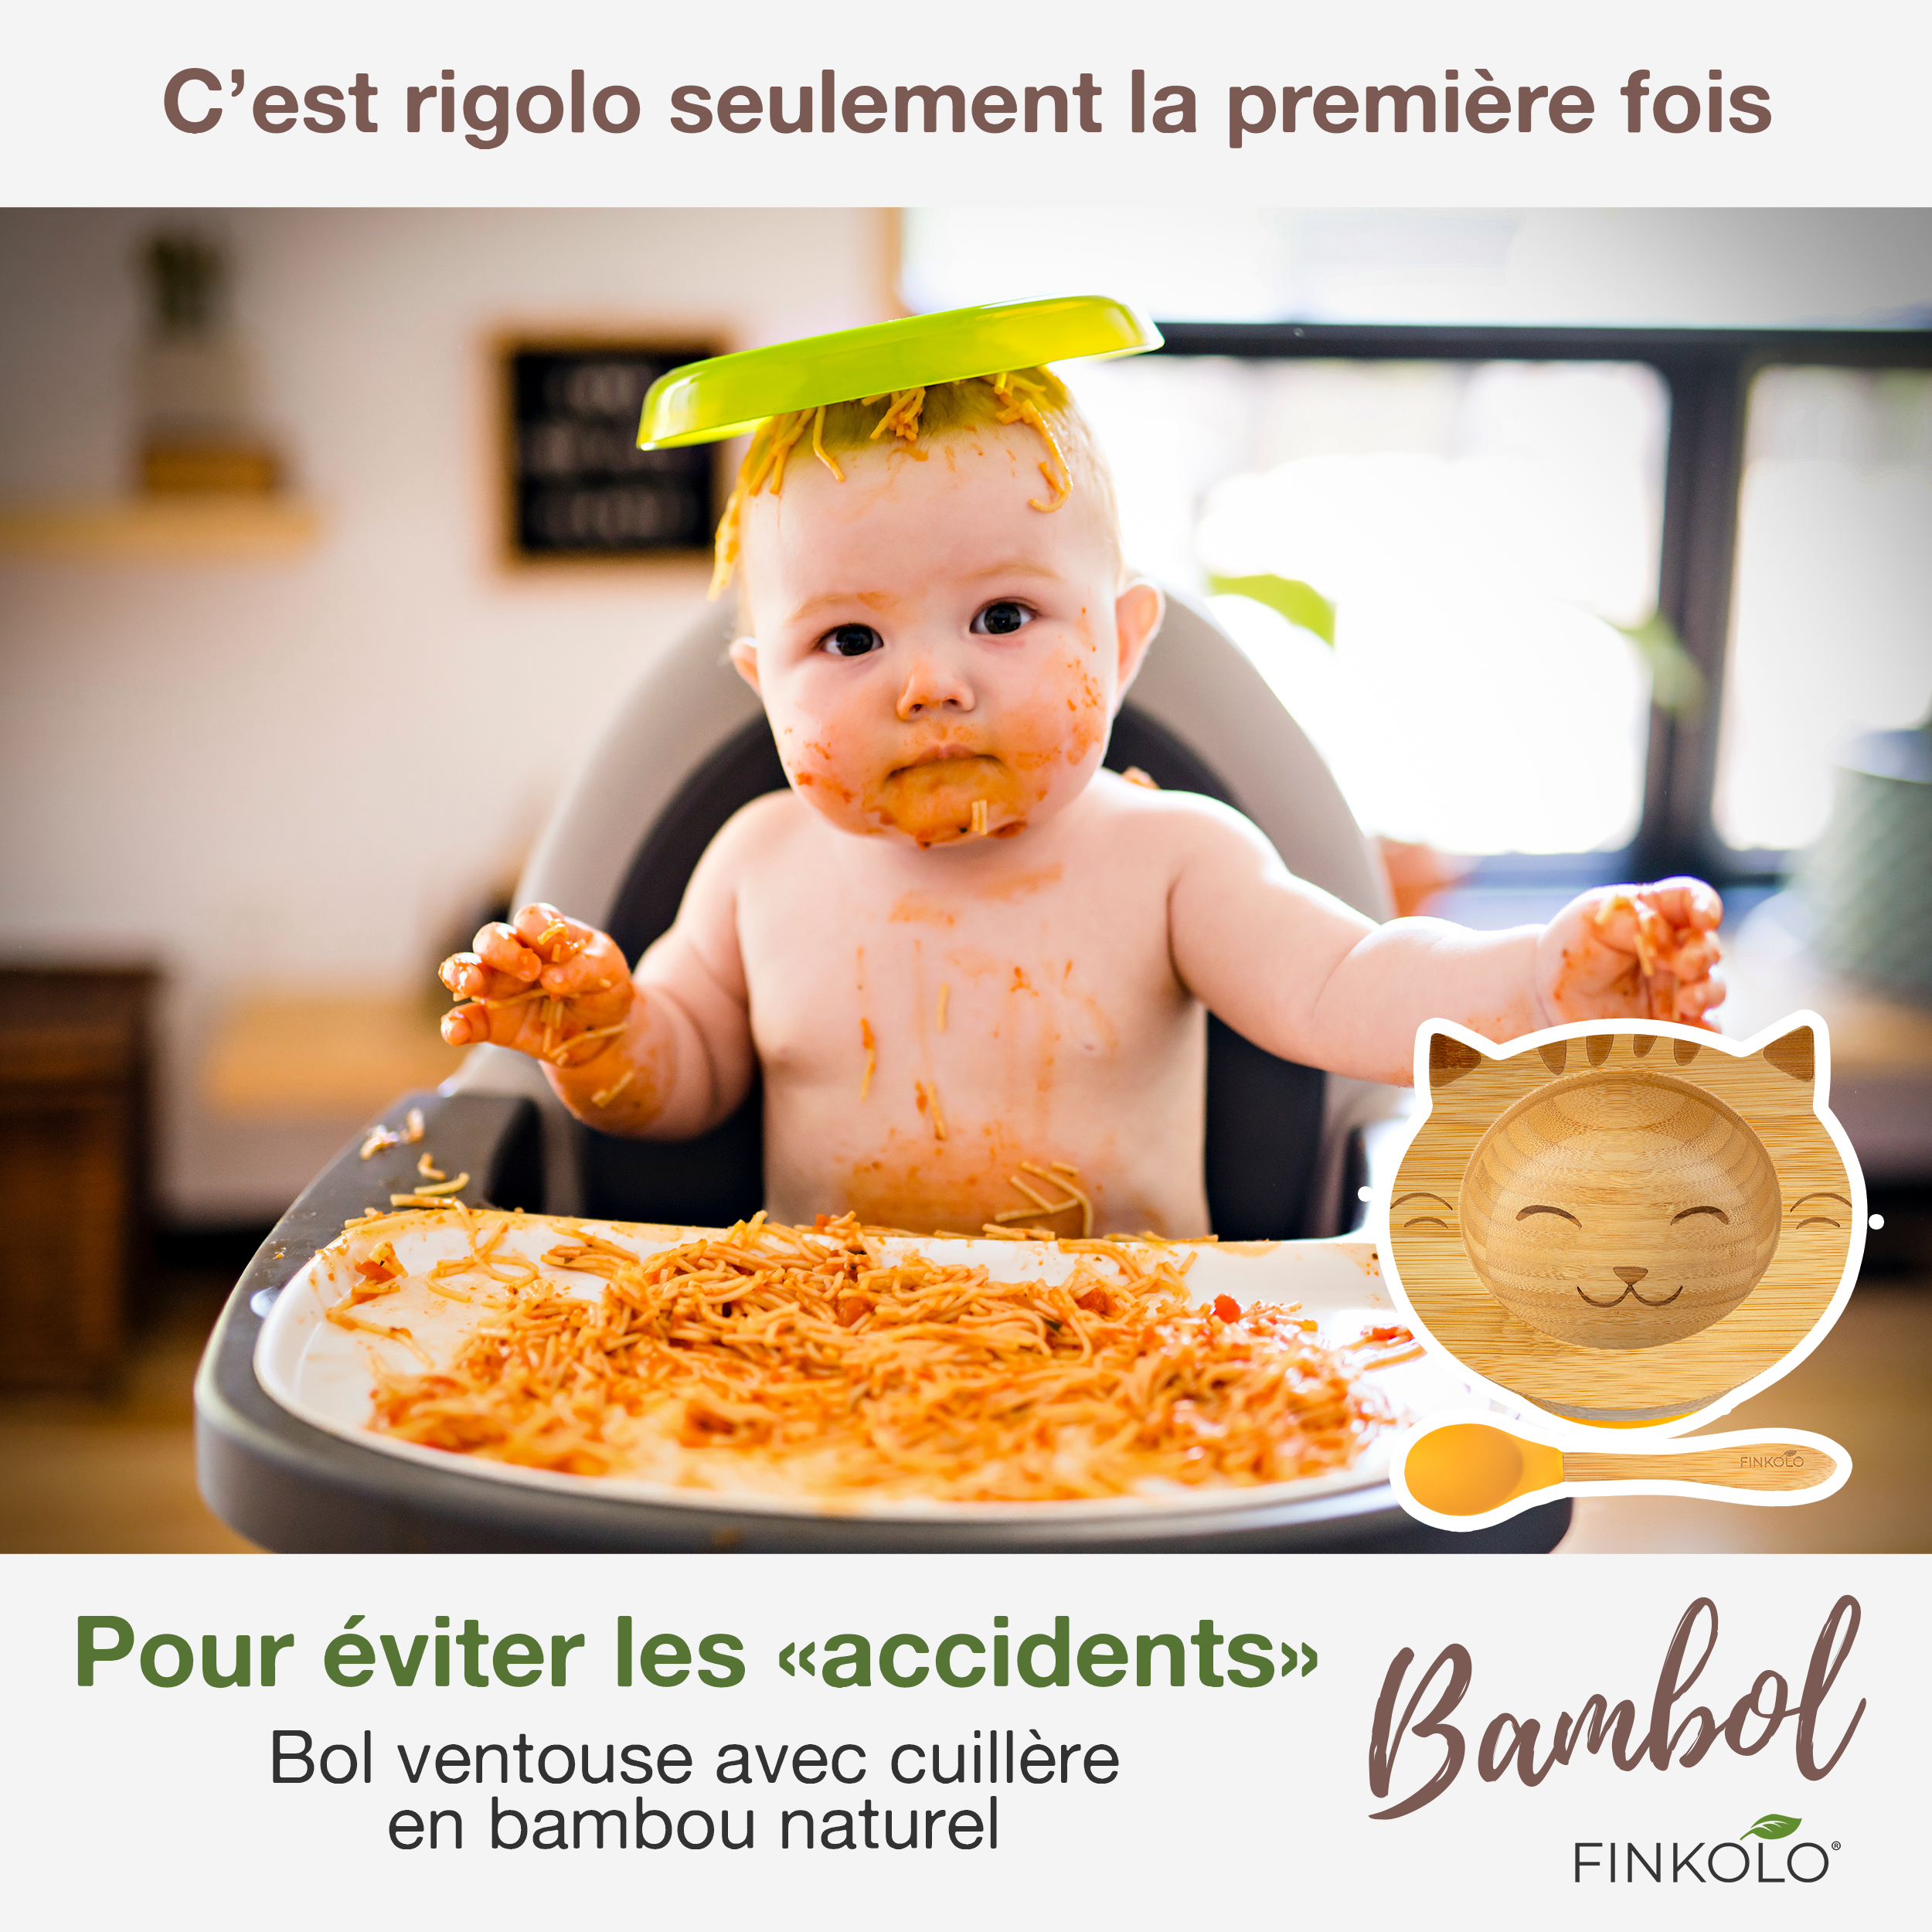 Le Bambol -  "Camille" Chat